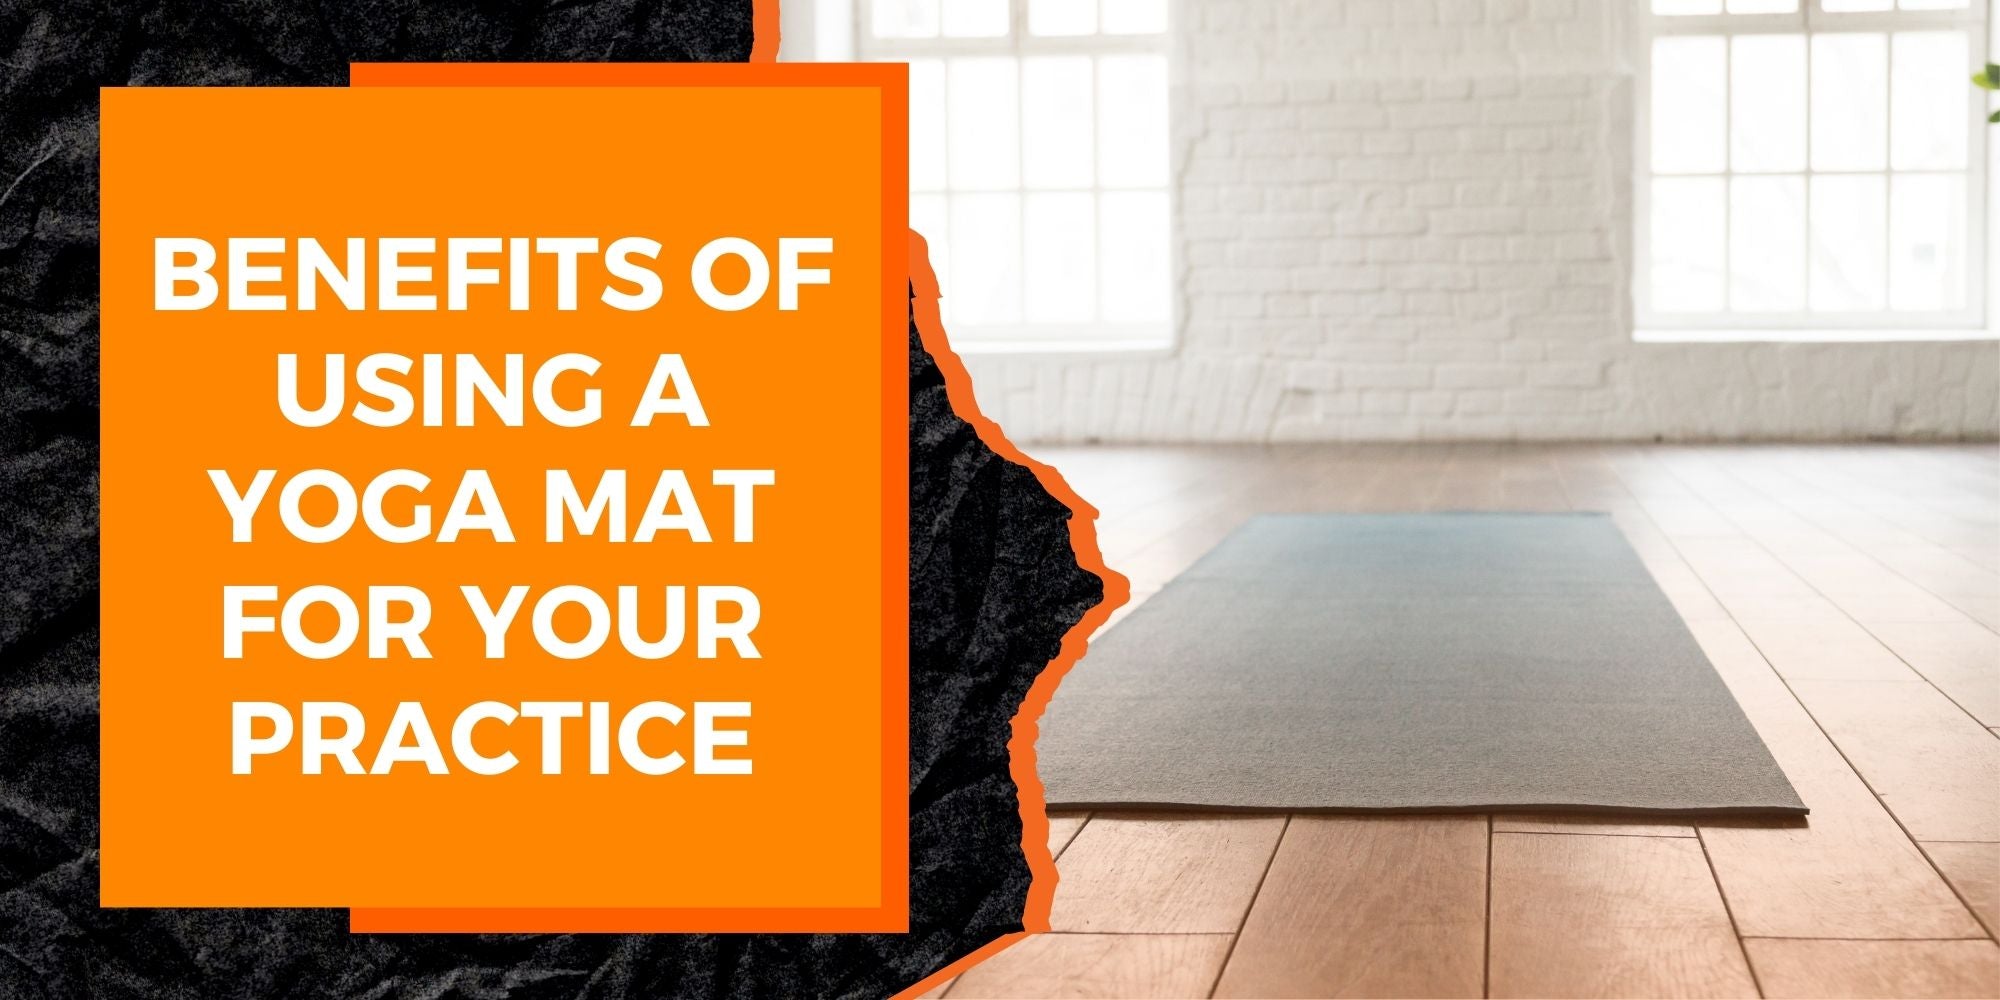 The Benefits of Using a Yoga Mat for Your Practice